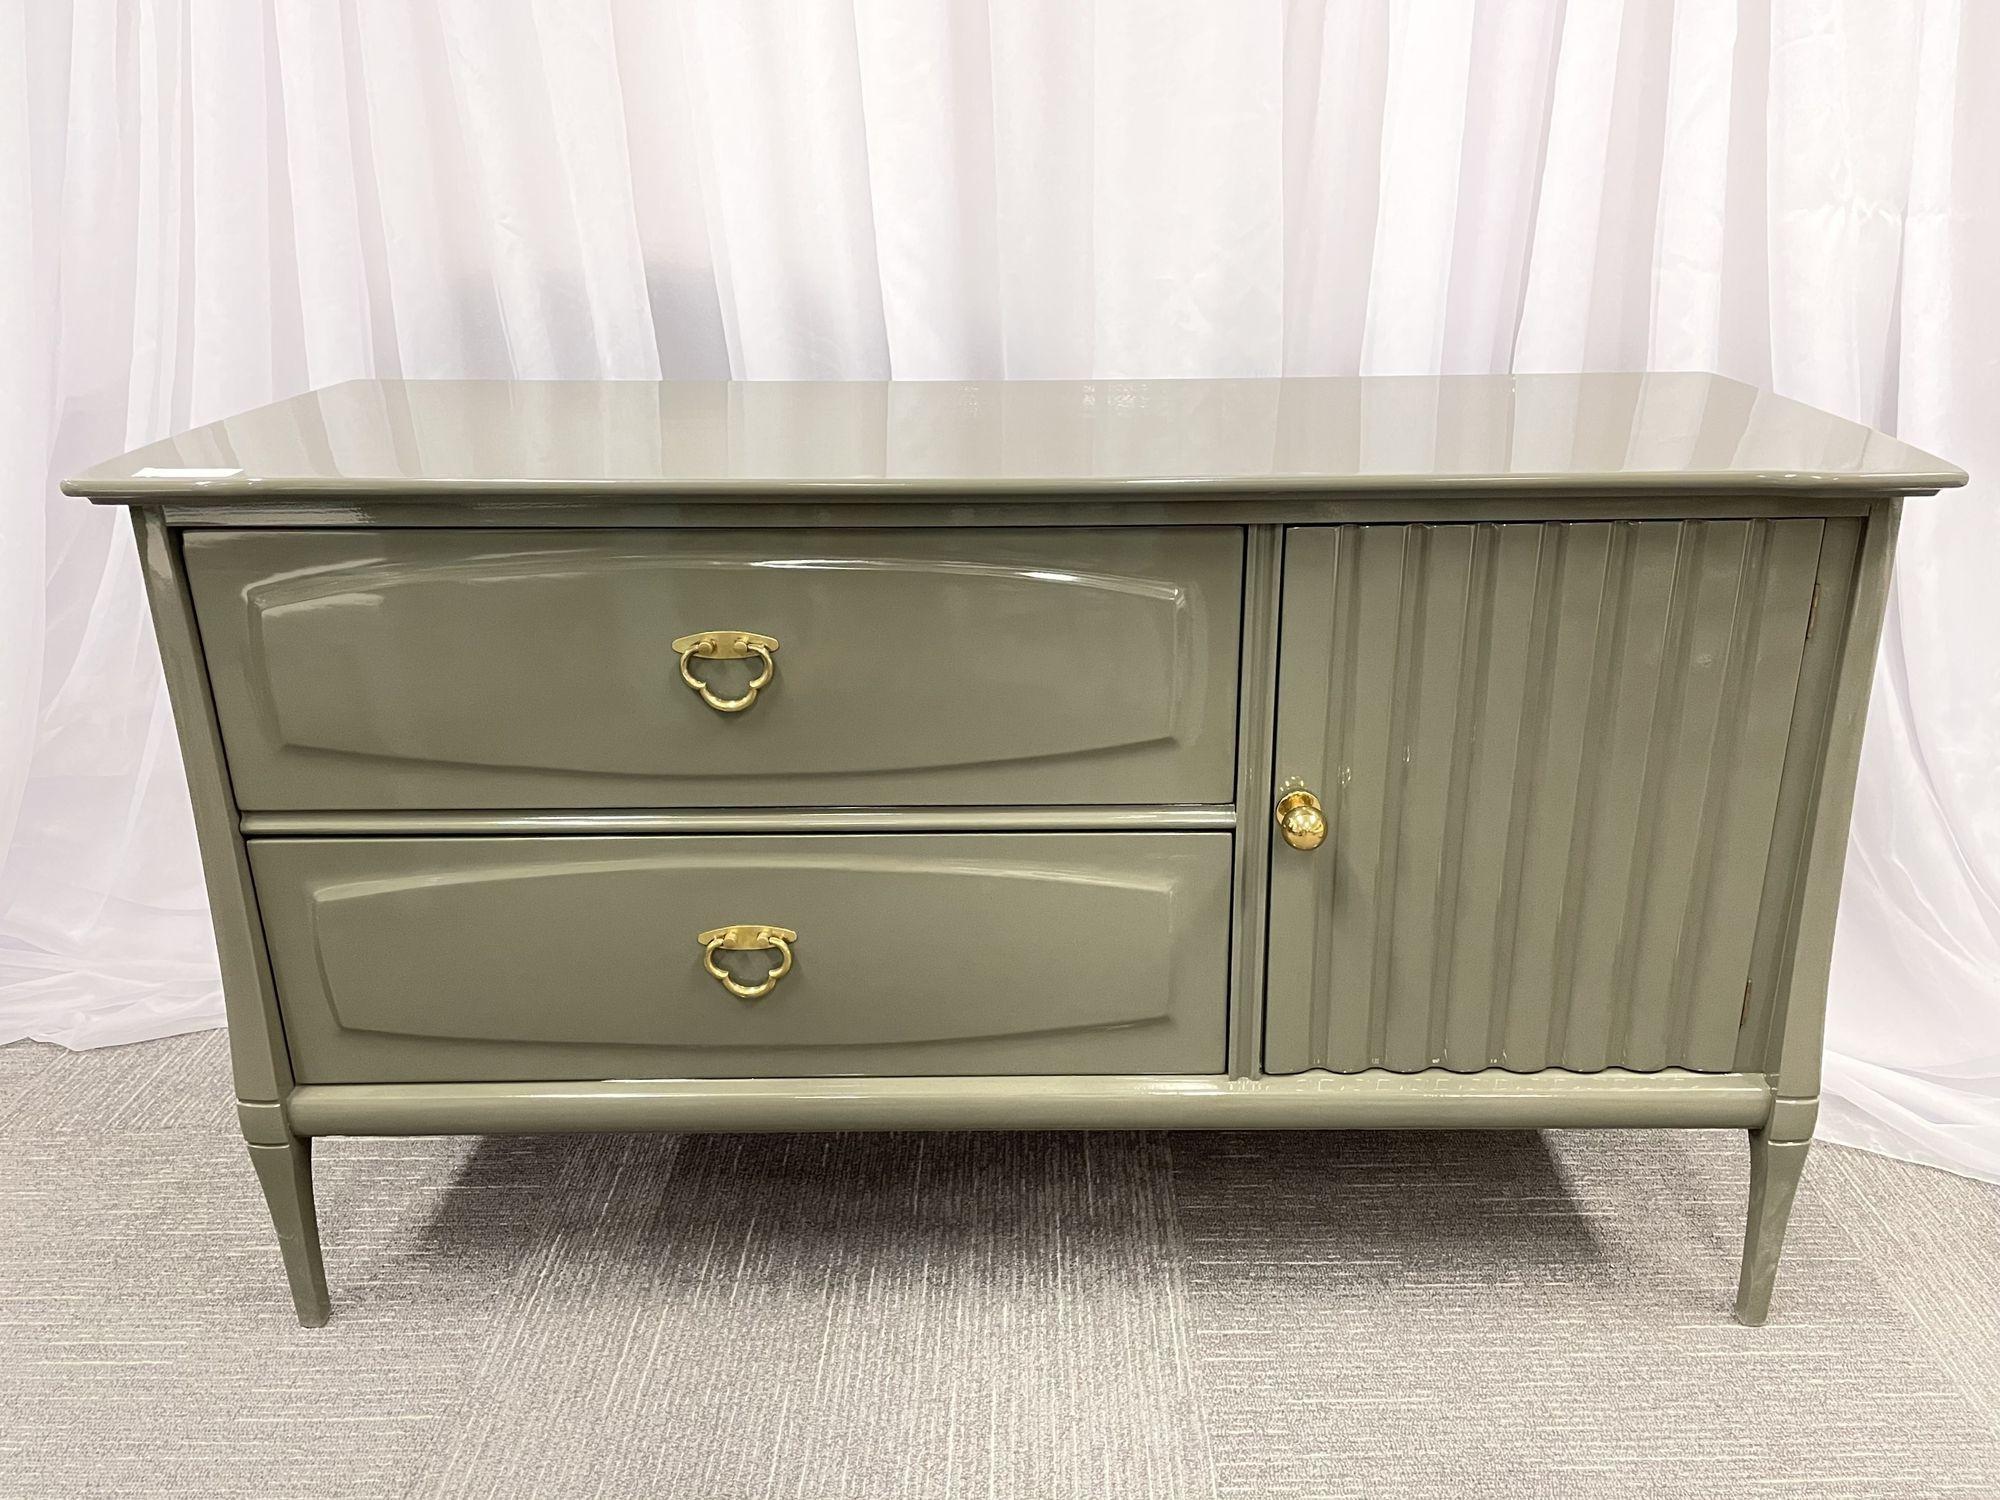 A Mid Century Modern Heywood Wakefield Server, Commode, Dresser recently lacquered in a wonderful olive green with a bronze mounts
Other American designers of the period include Adrian Pearsall, Milo Baughman, Vladimir Kagan, Paul McCobb, Paul